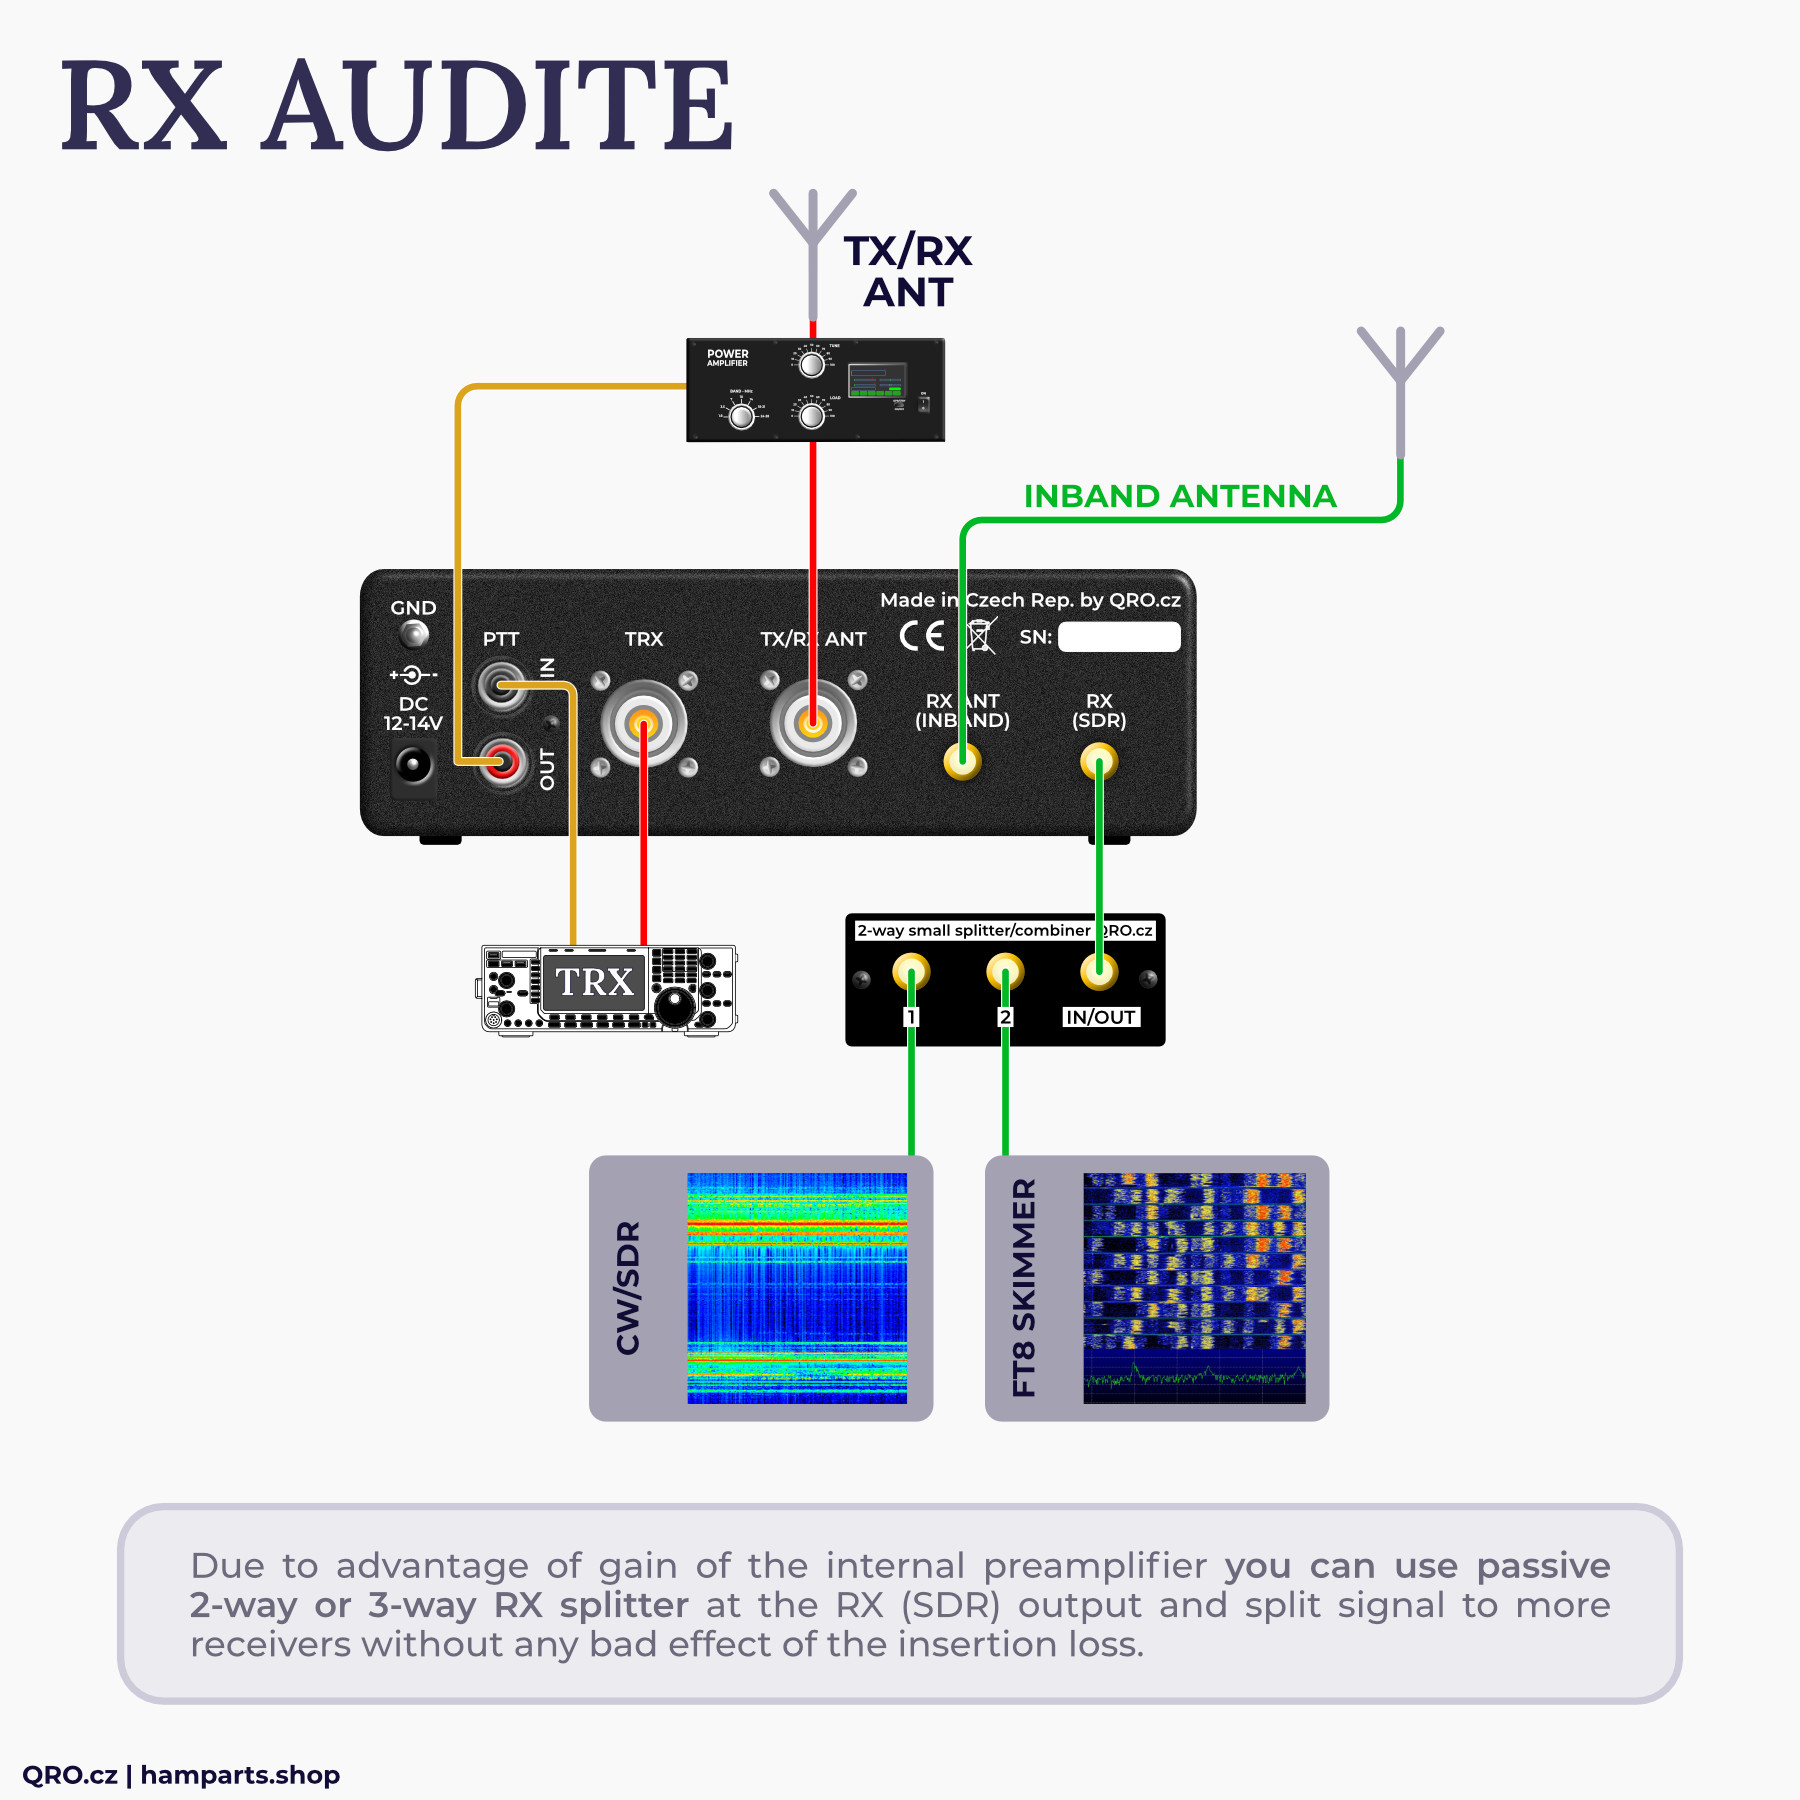 rx audite with passive 2-way or 3-way splitter by qro.cz hamparts.shop